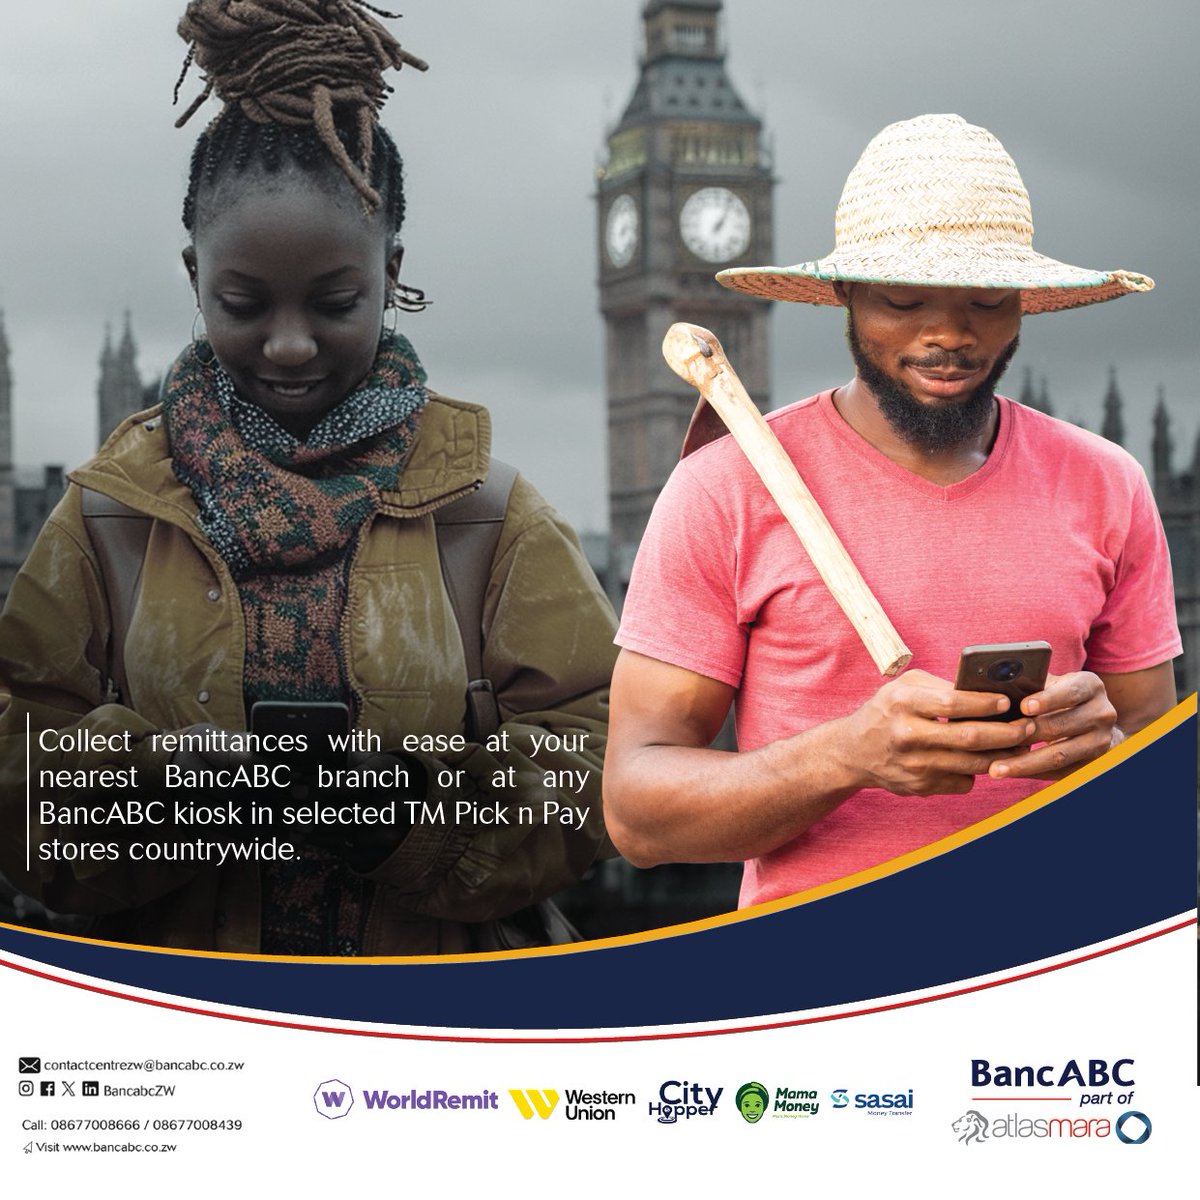 Enjoy the convenience of accessing💸 ✅ World Remit ✅ Mukuru ✅ City Hopper ✅ Western Union ✅ Mama Money ✅ Sasai Money Transfer Available at @BancabcZW dedicated Remittance Centres in Harare & Bulawayo, branches & kiosks in selected TM Pick n Pay outlets. #BankDifferent🏦